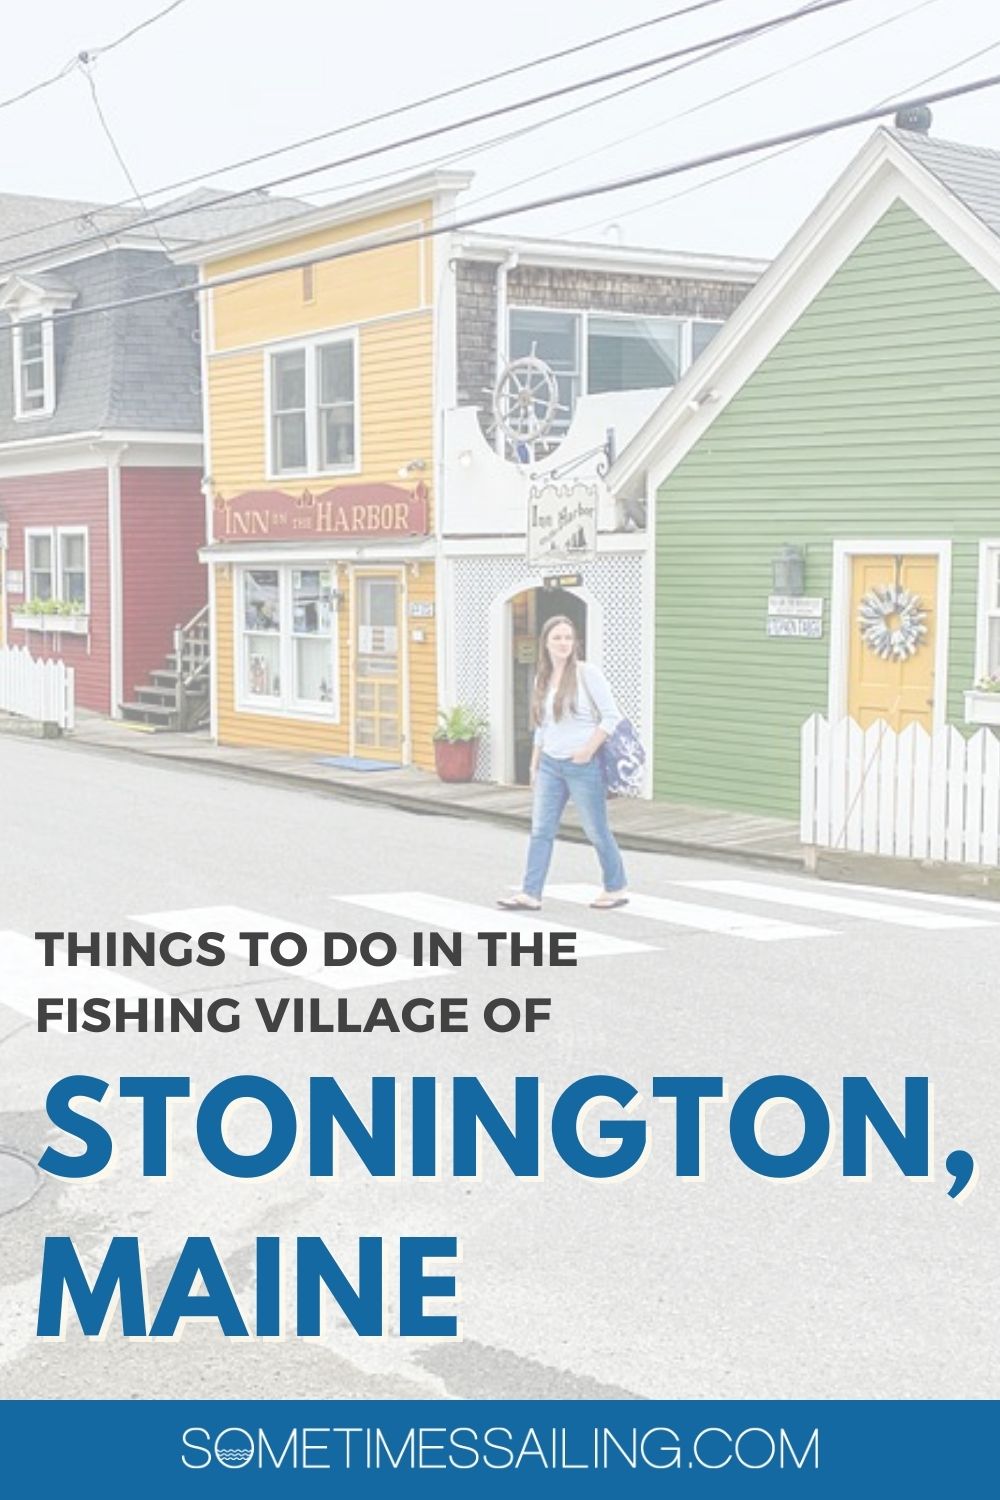 Things to do in the fishing village of Stonington, Maine, with a photo of colorful buildings behind her.